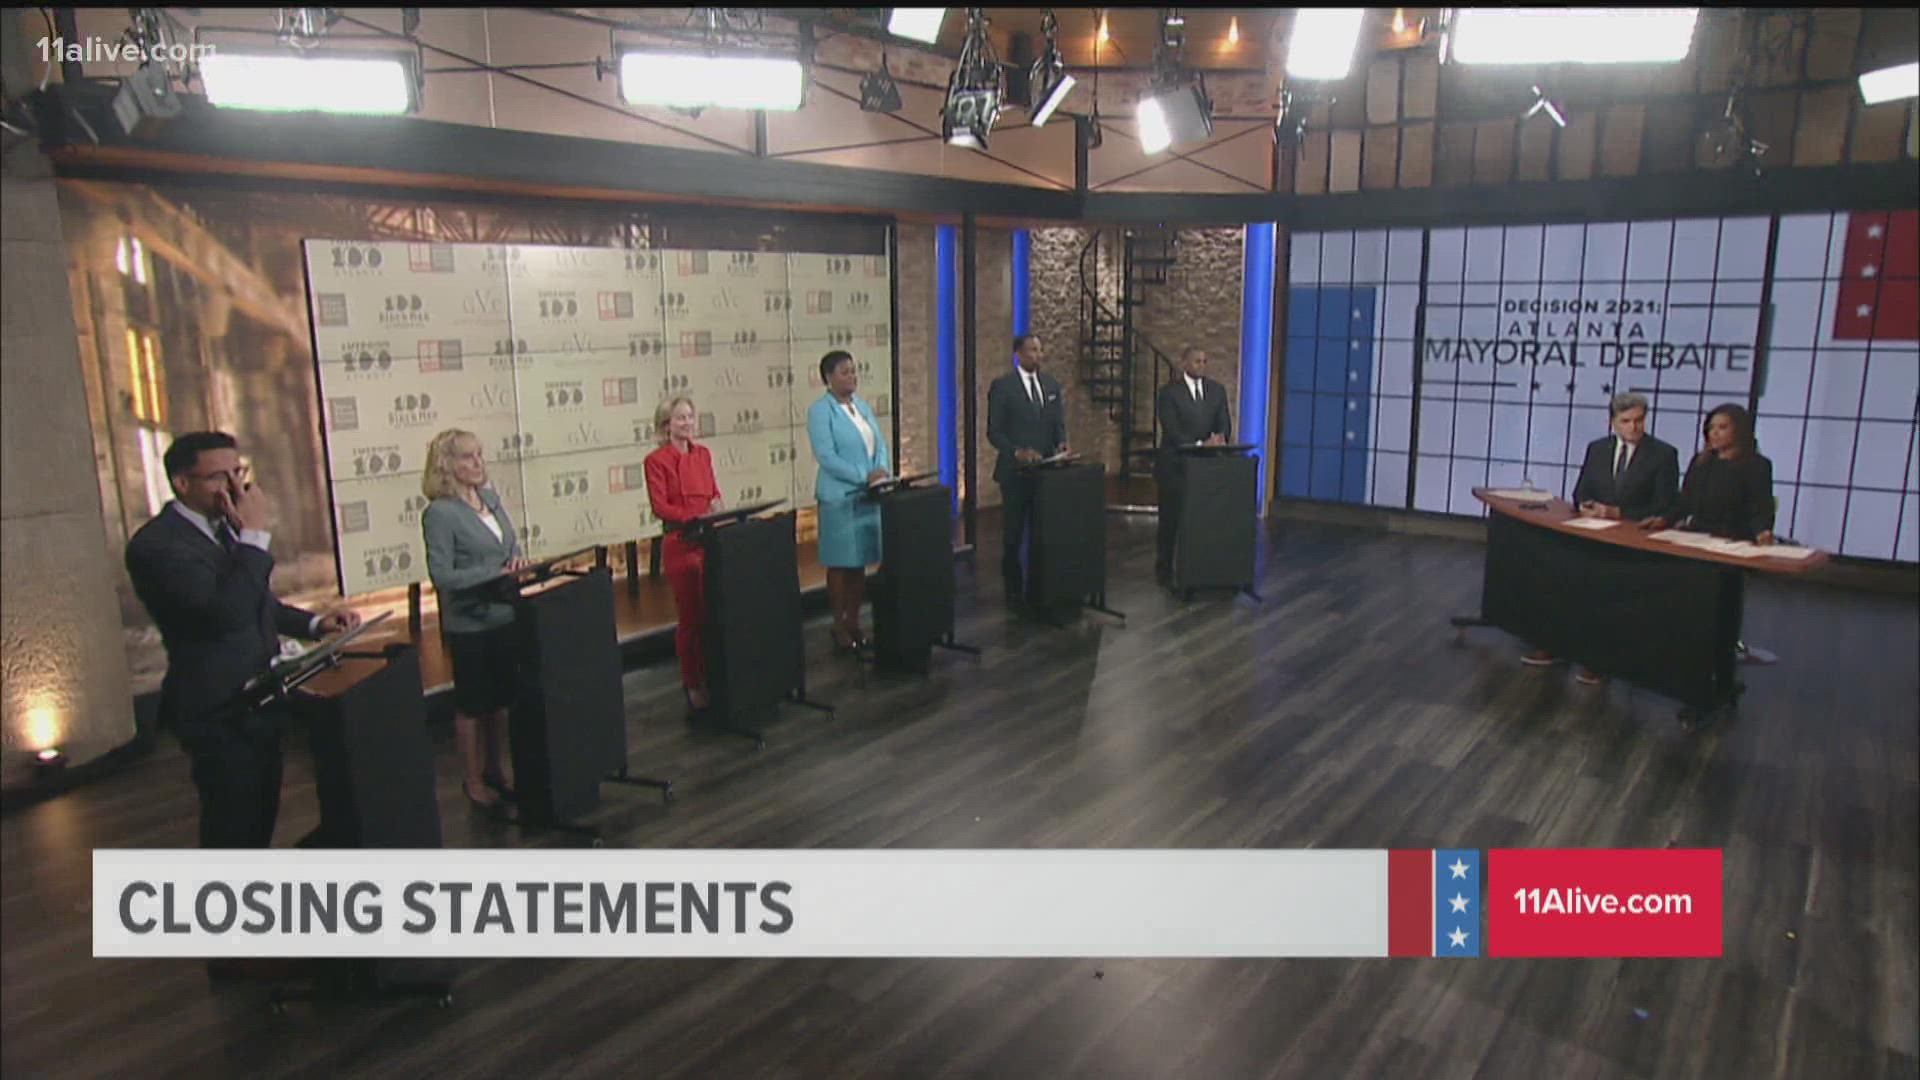 Six candidates participated in a debate on 11Alive. Take a look at their closing statements.